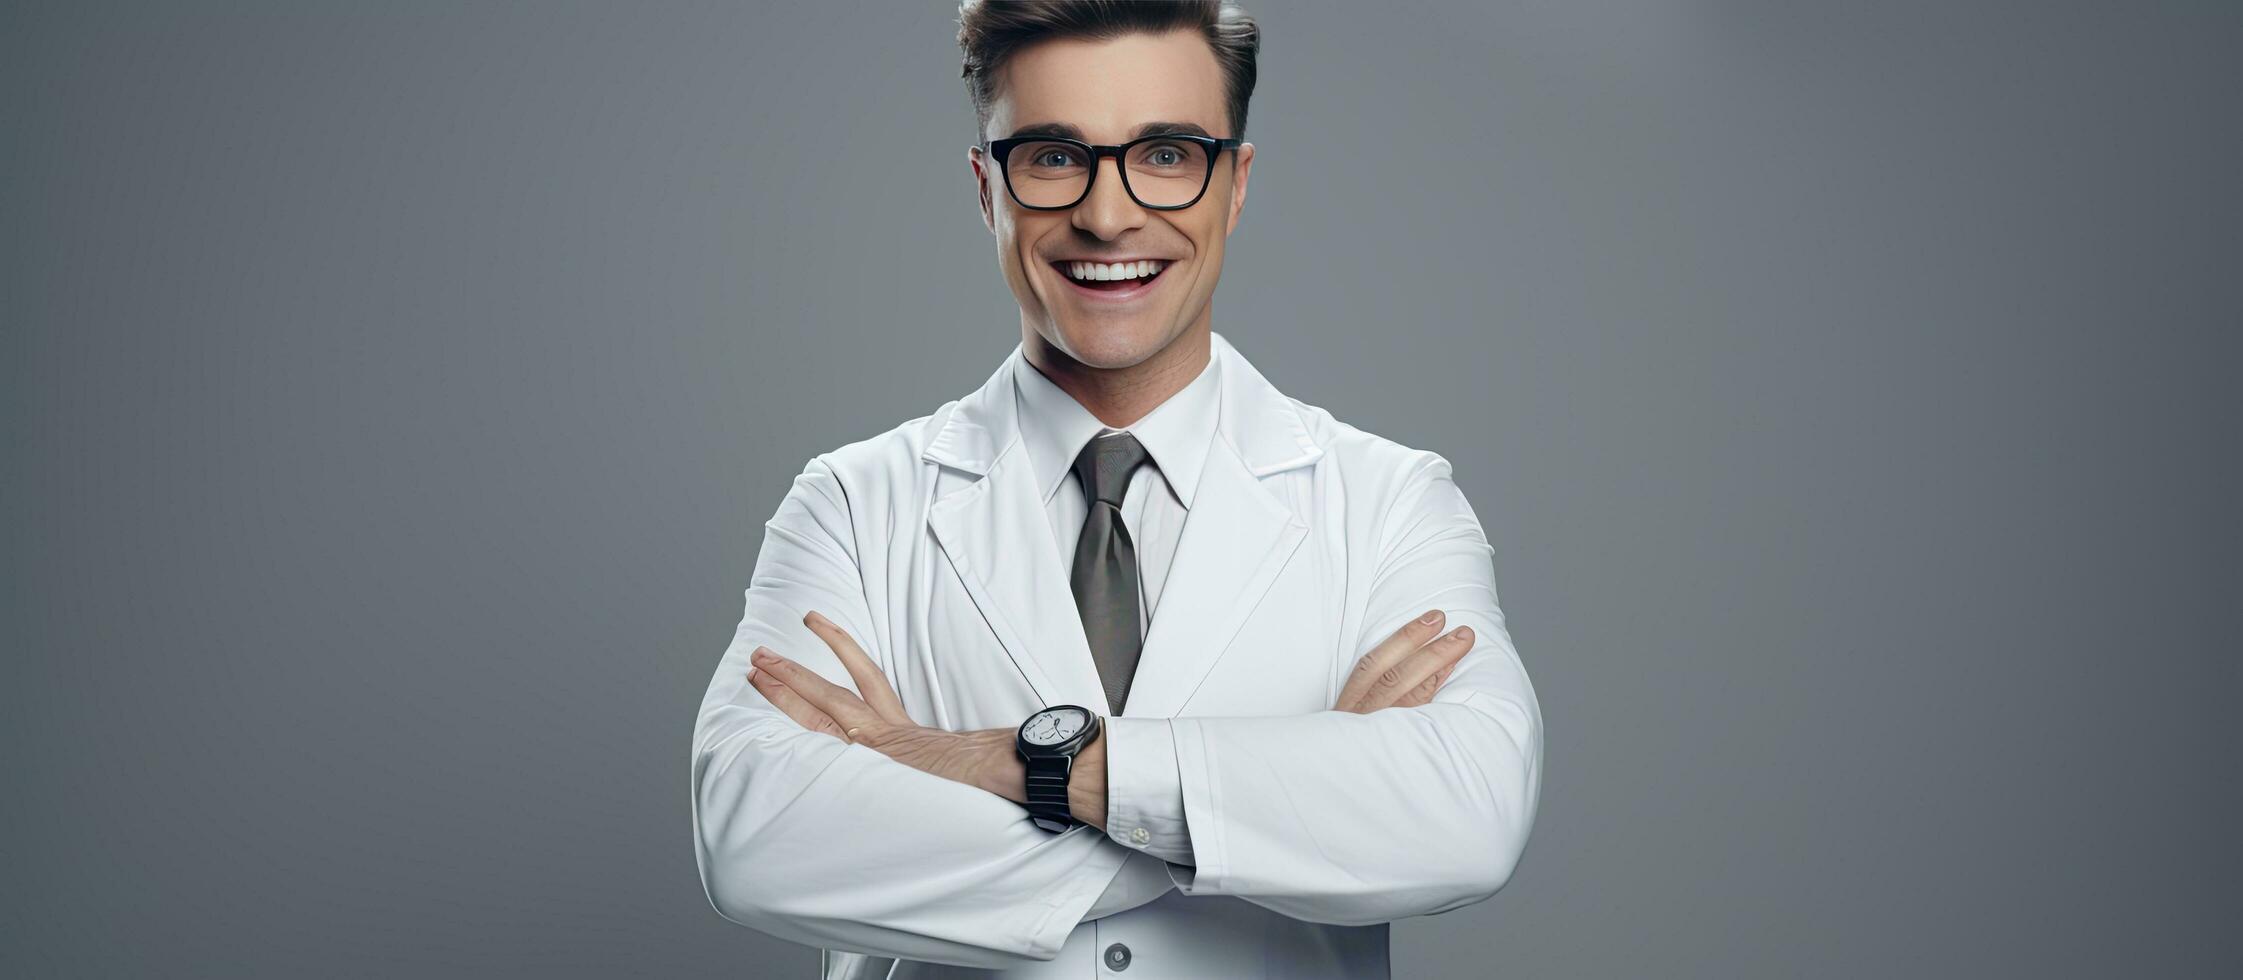 Male dentist with white coat glasses and stethoscope looks at camera with open hands on gray background photo